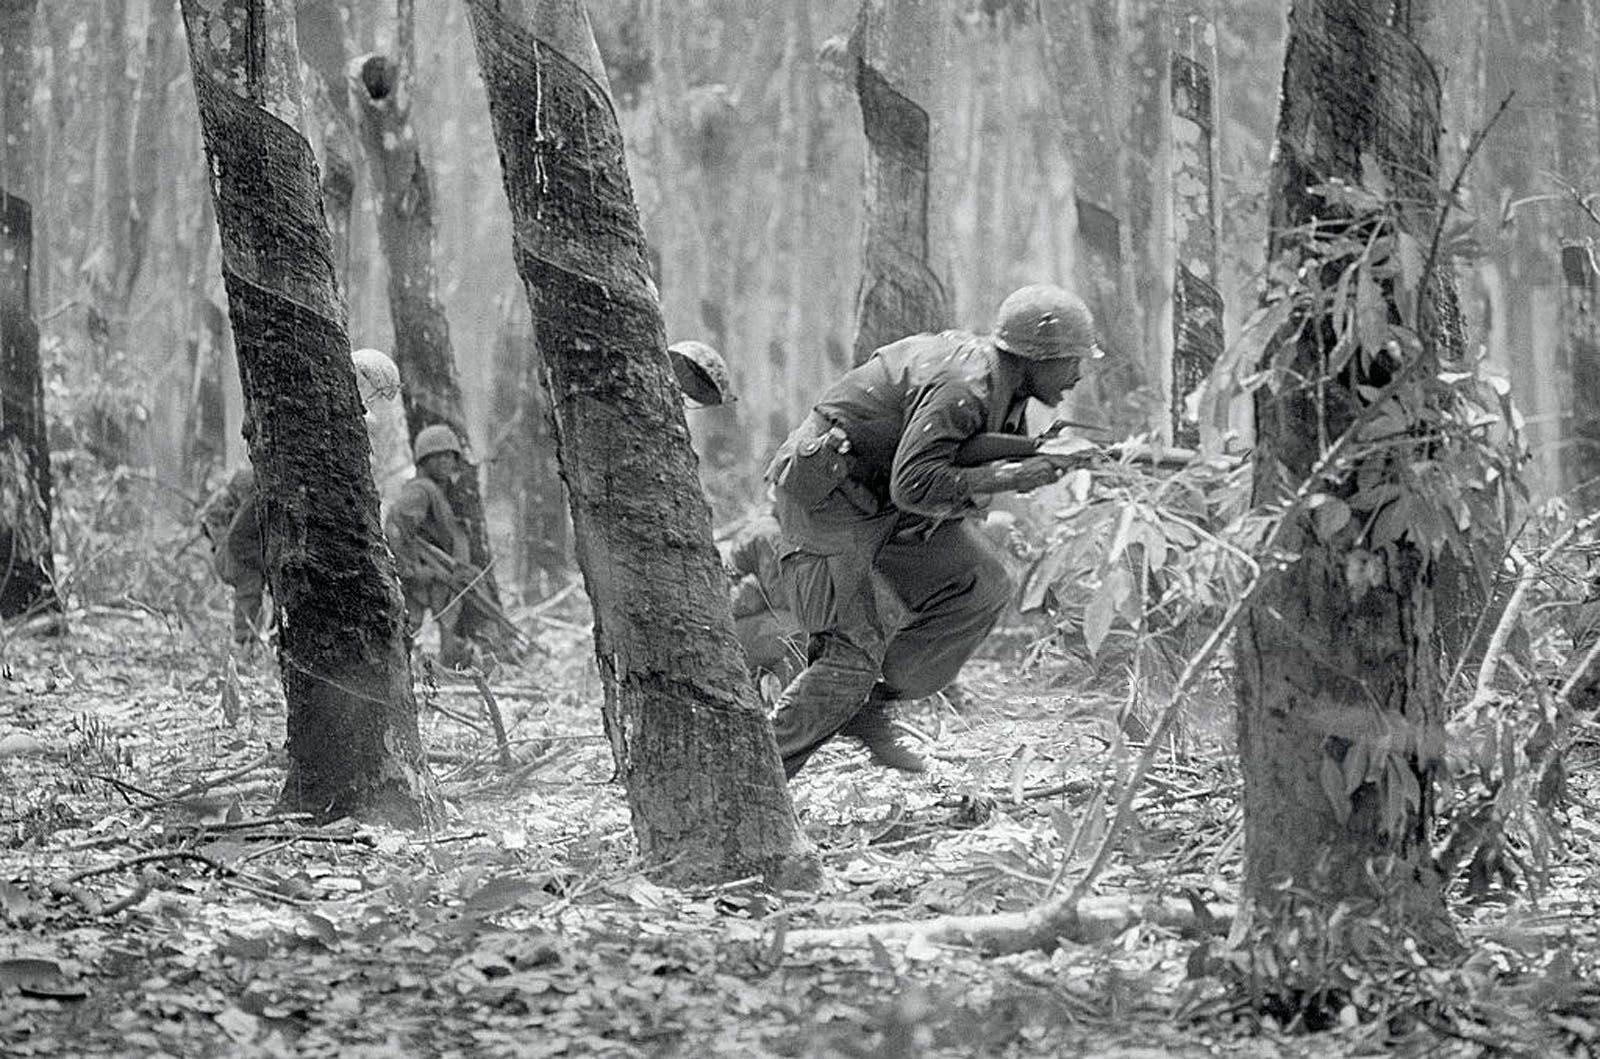 ‘Don’t Shoot the Rubber Trees!’ – Vet Recalls Absurd Rules-of-Engagement GIs Faced in Vietnam War 